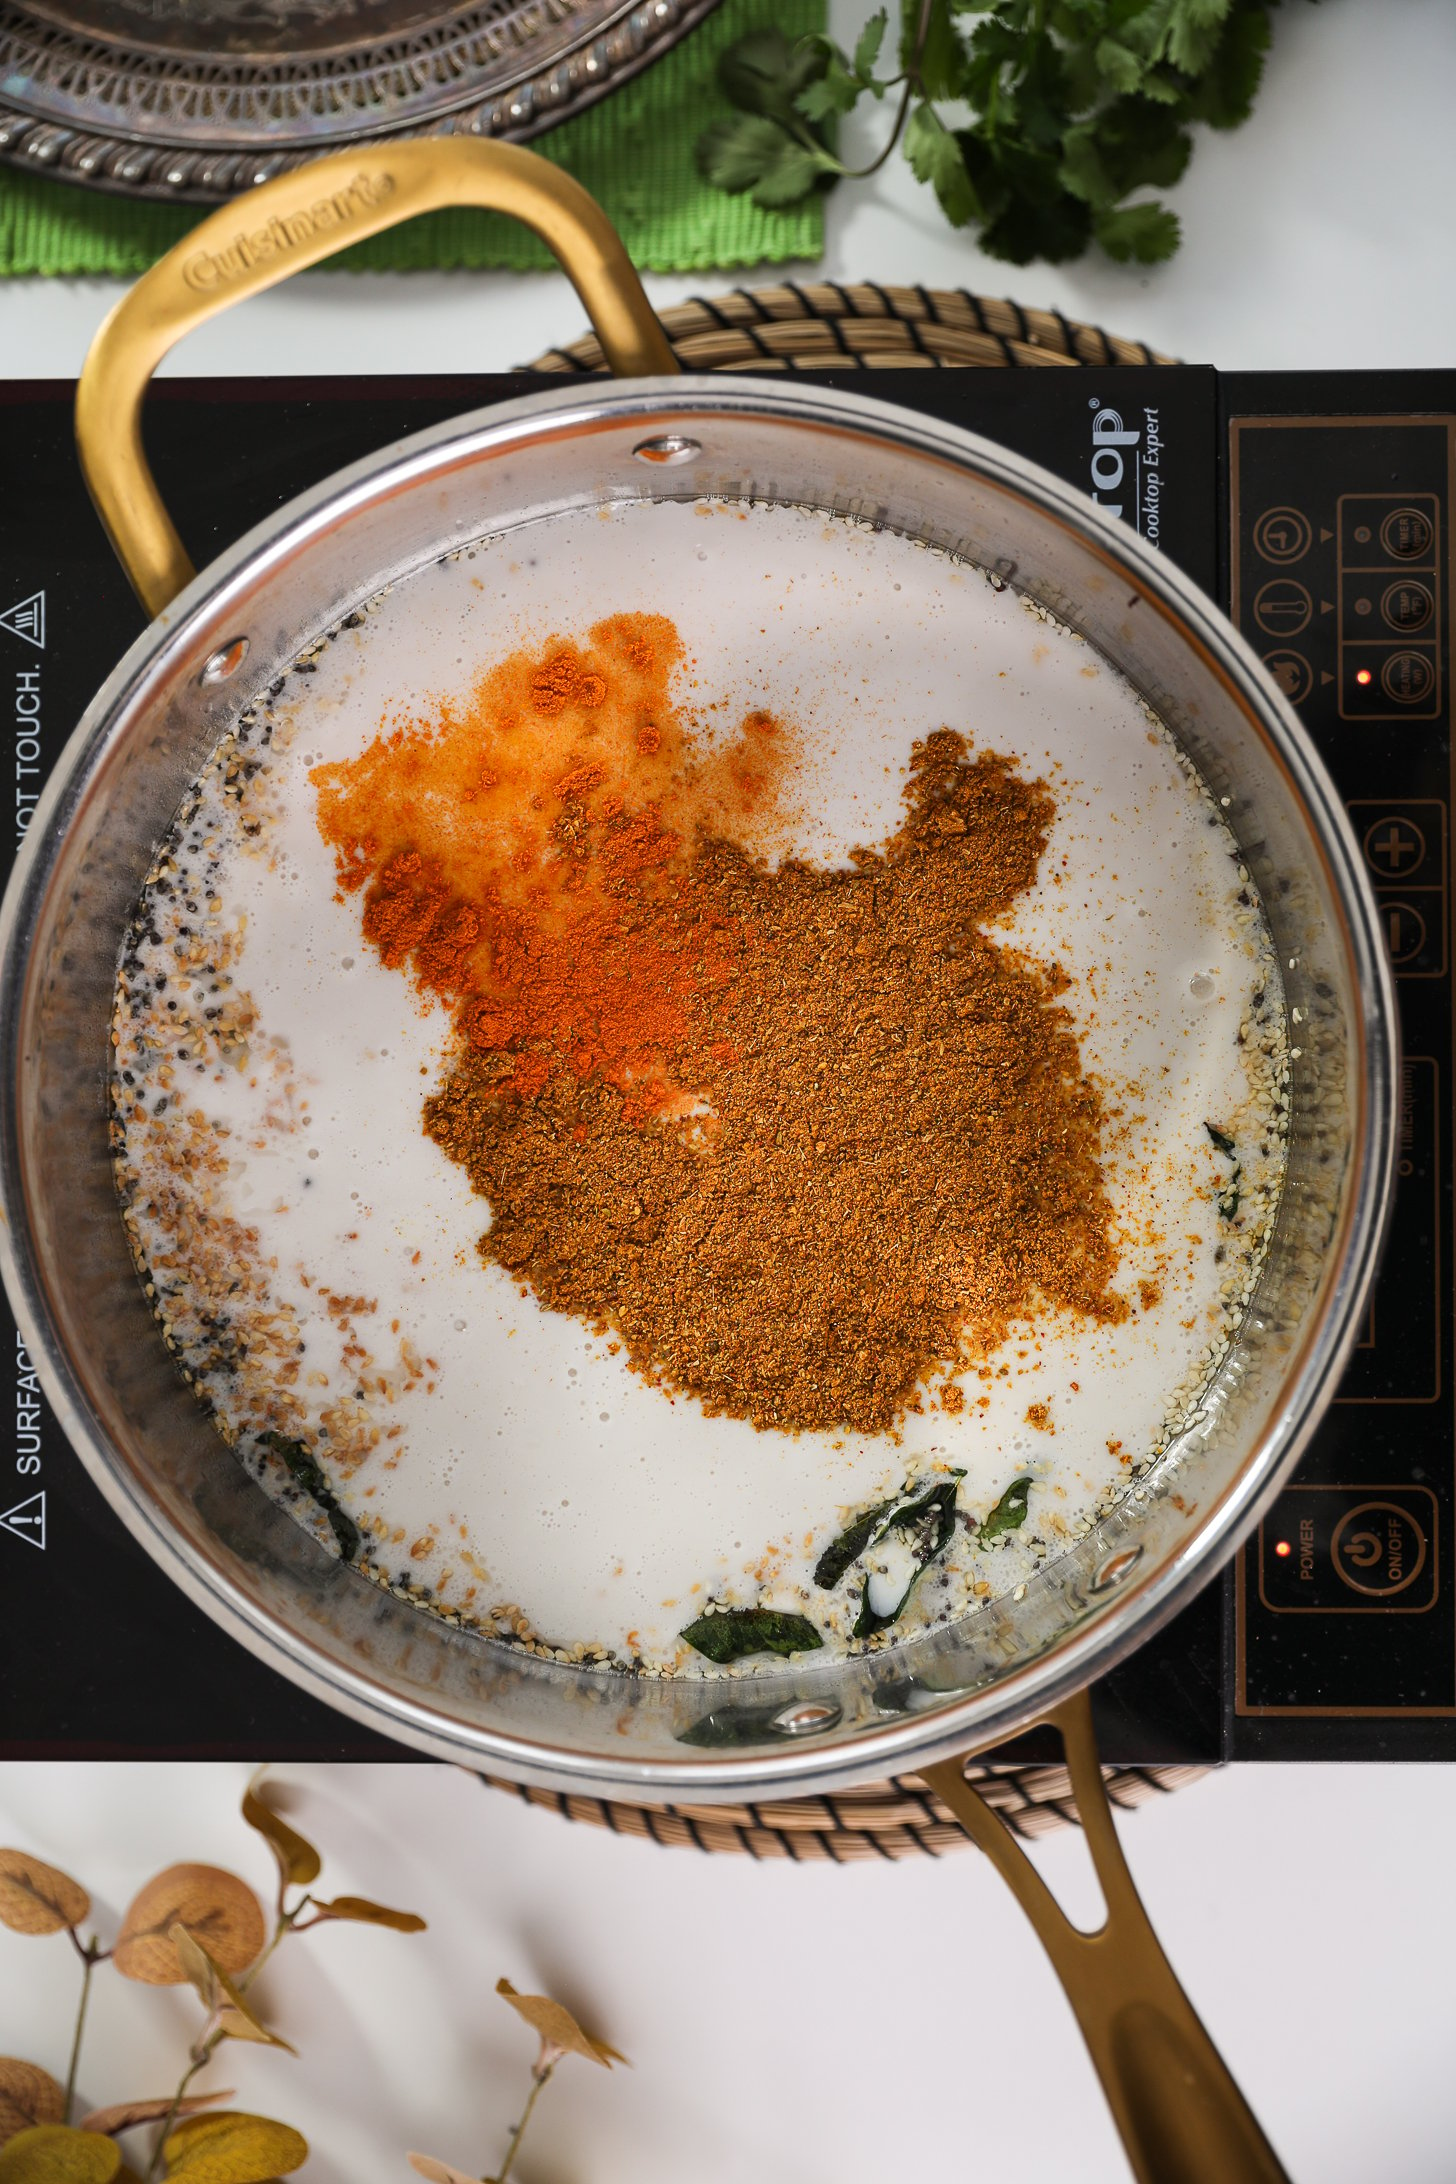 A mobile cooktop displaying a pan filled with coconut milk and topped with a dusting of powdered spices.